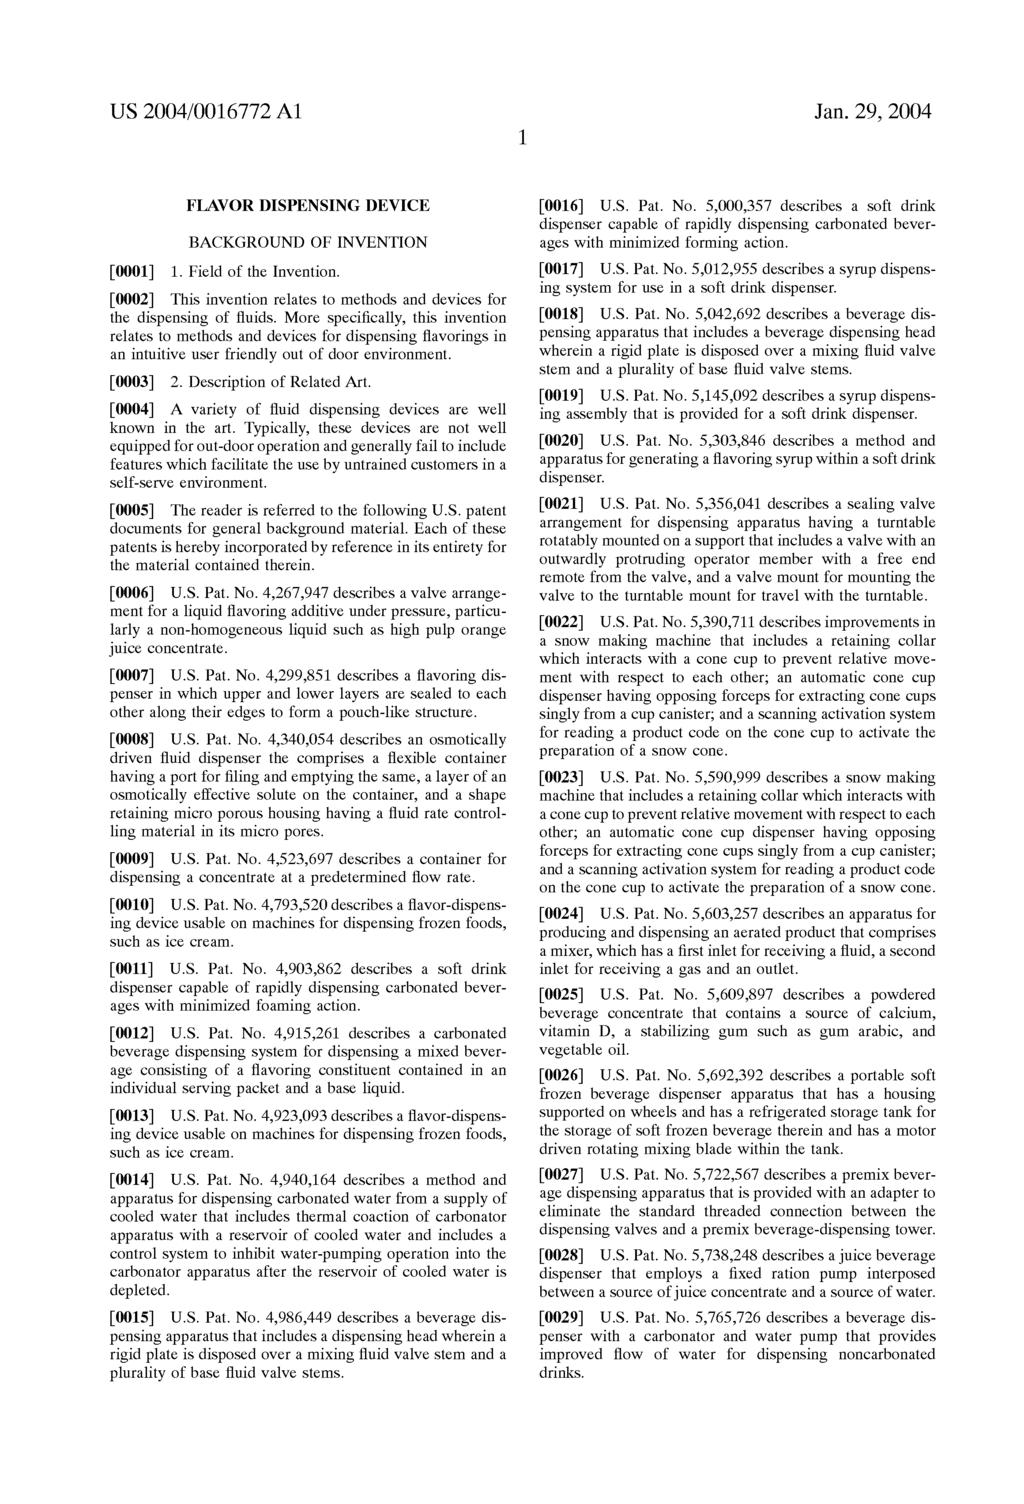 US 2004/OO16772 A1 Jan. 29, 2004 FLAVOR DISPENSING DEVICE BACKGROUND OF INVENTION 0001) 1. Field of the Invention. 0002 This invention relates to methods and devices for the dispensing of fluids.